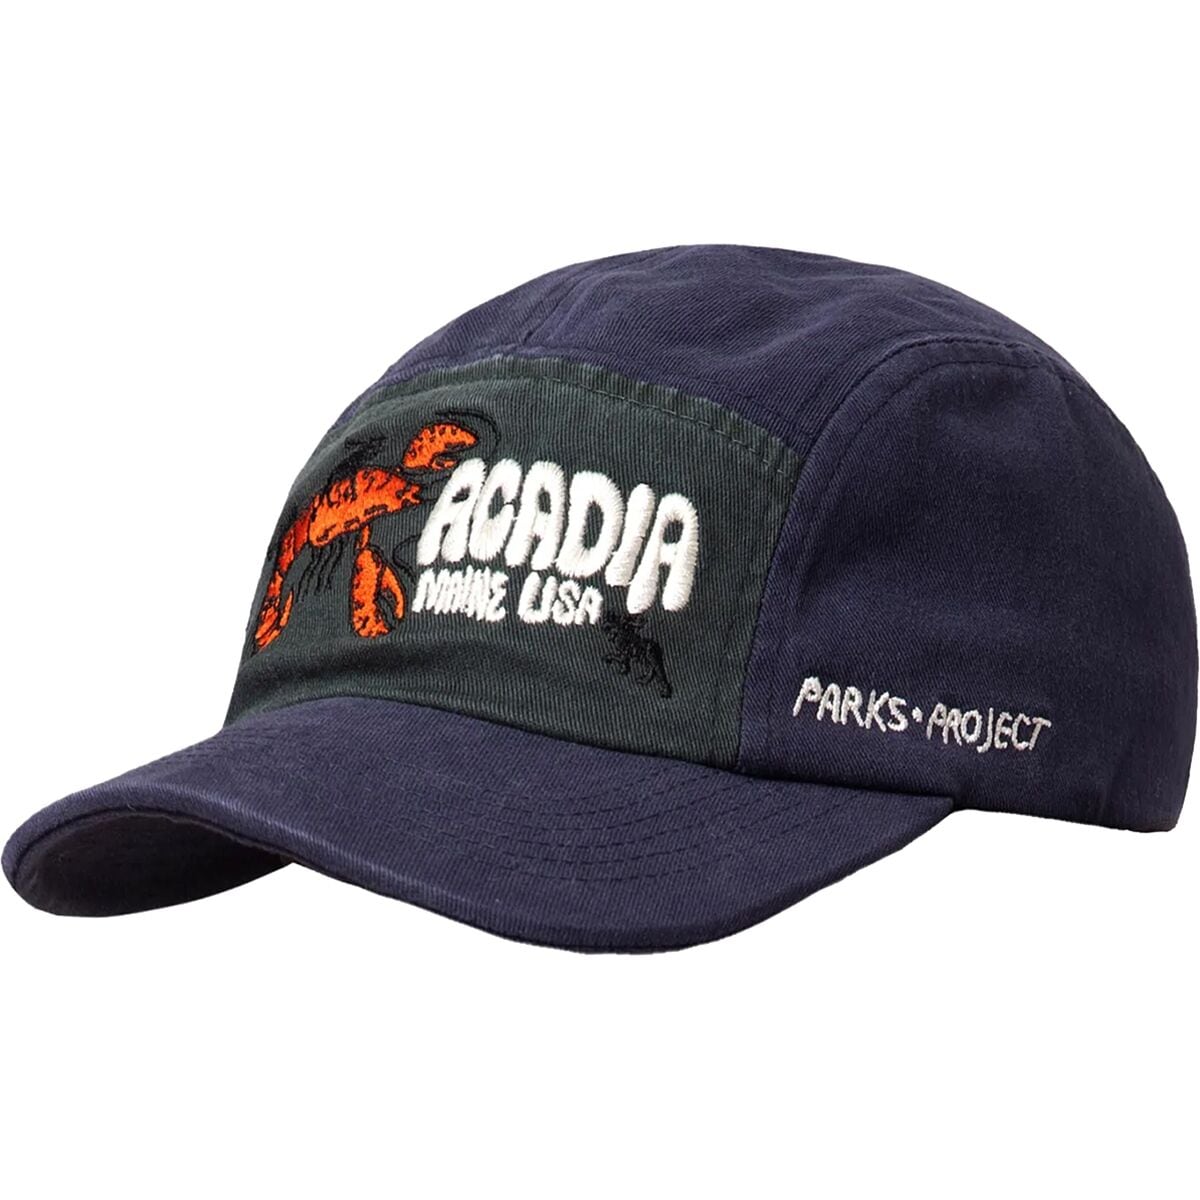 Parks Project Acadia Lobster Hat